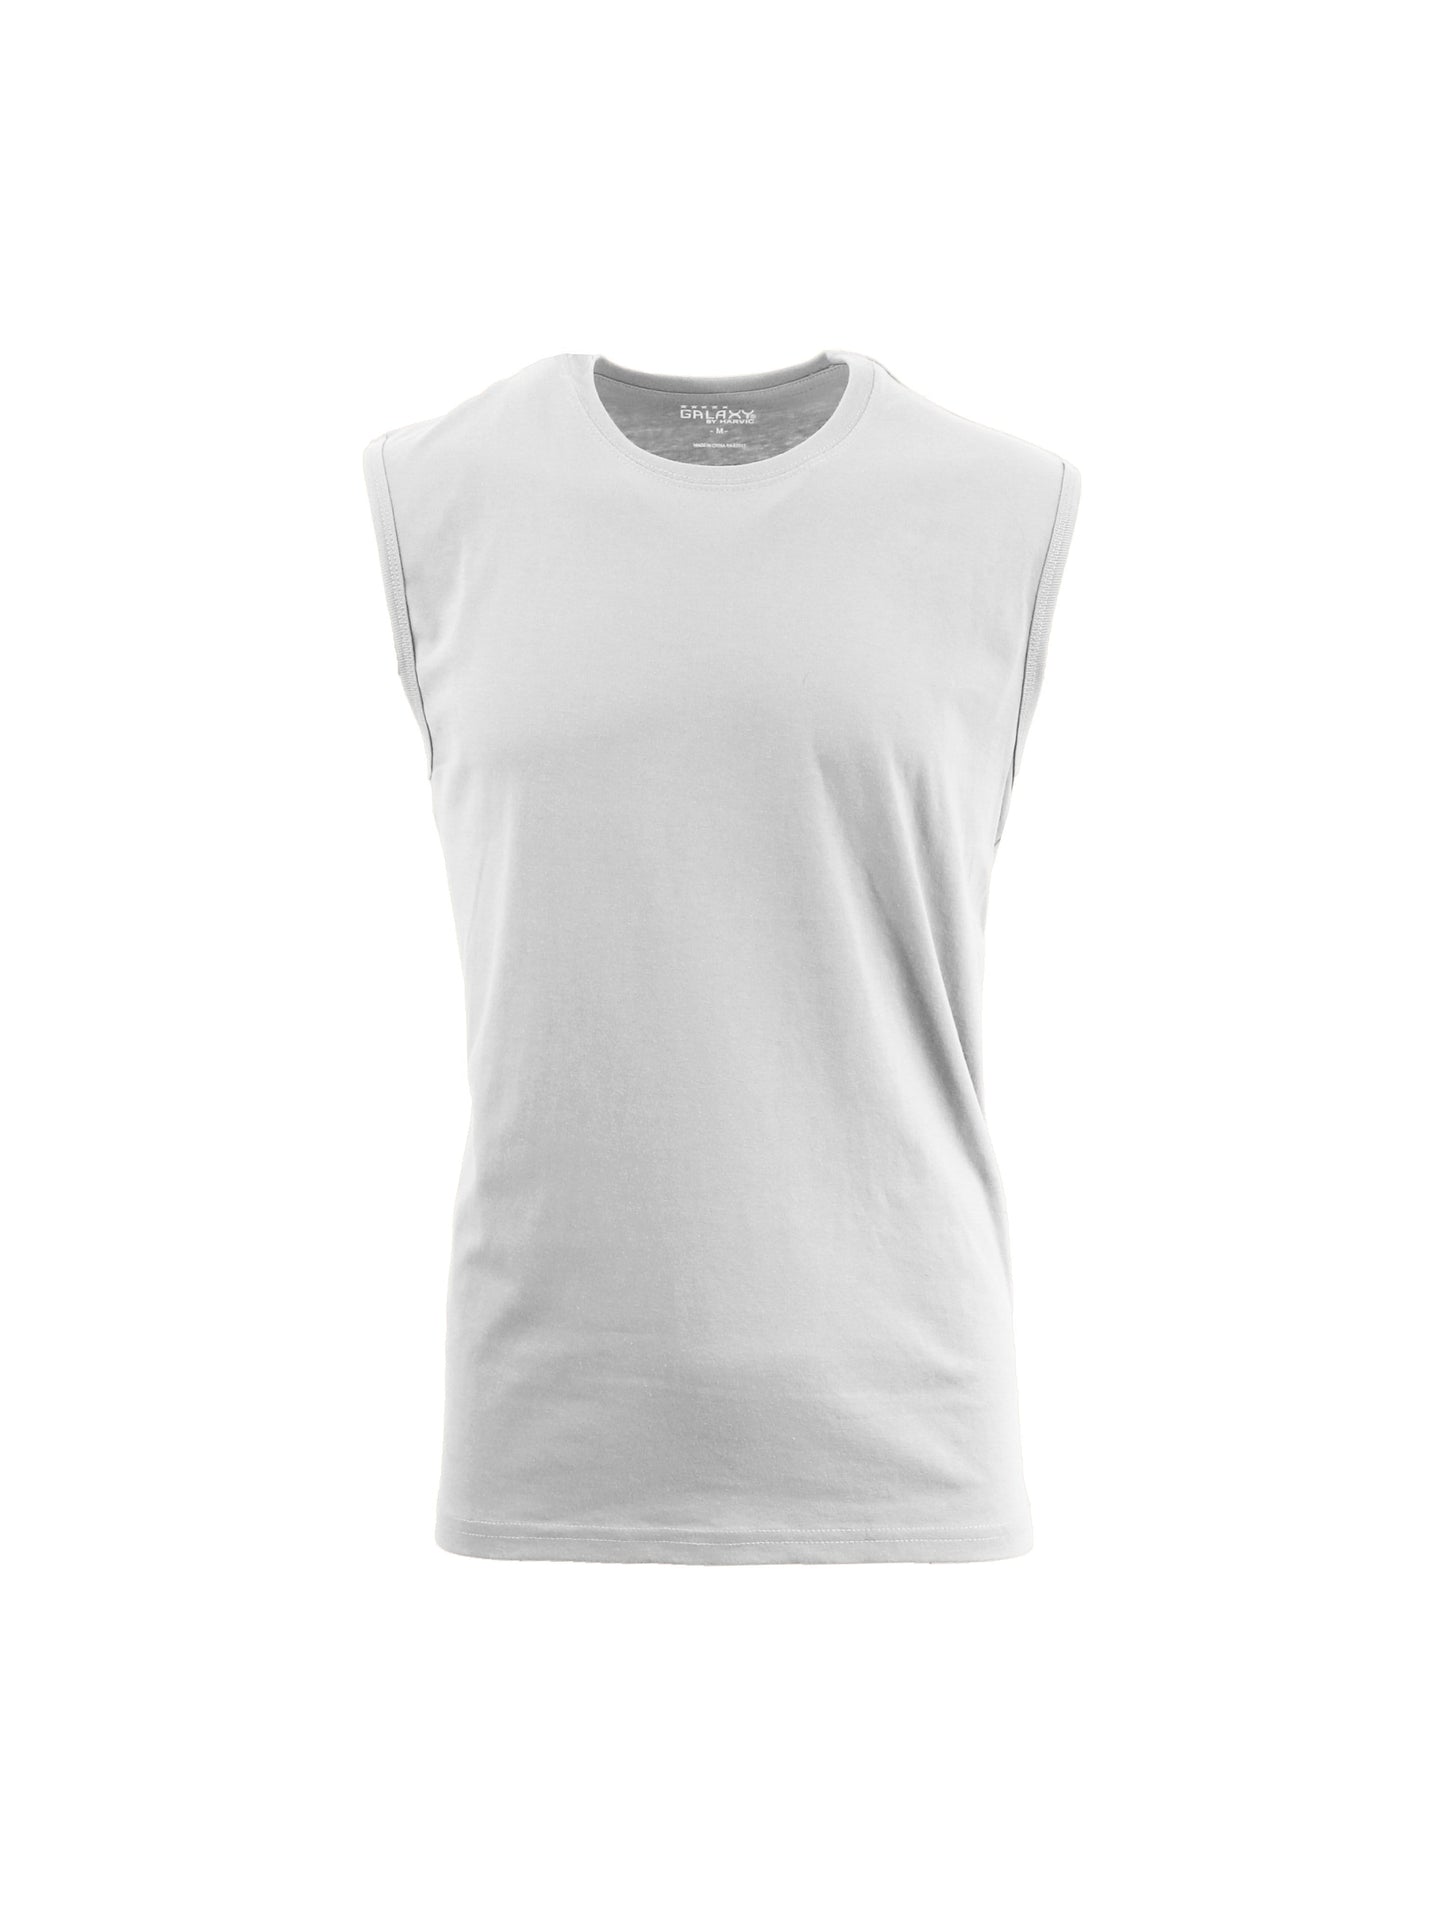 Men's Muscle Tank T-Shirt - GalaxybyHarvic